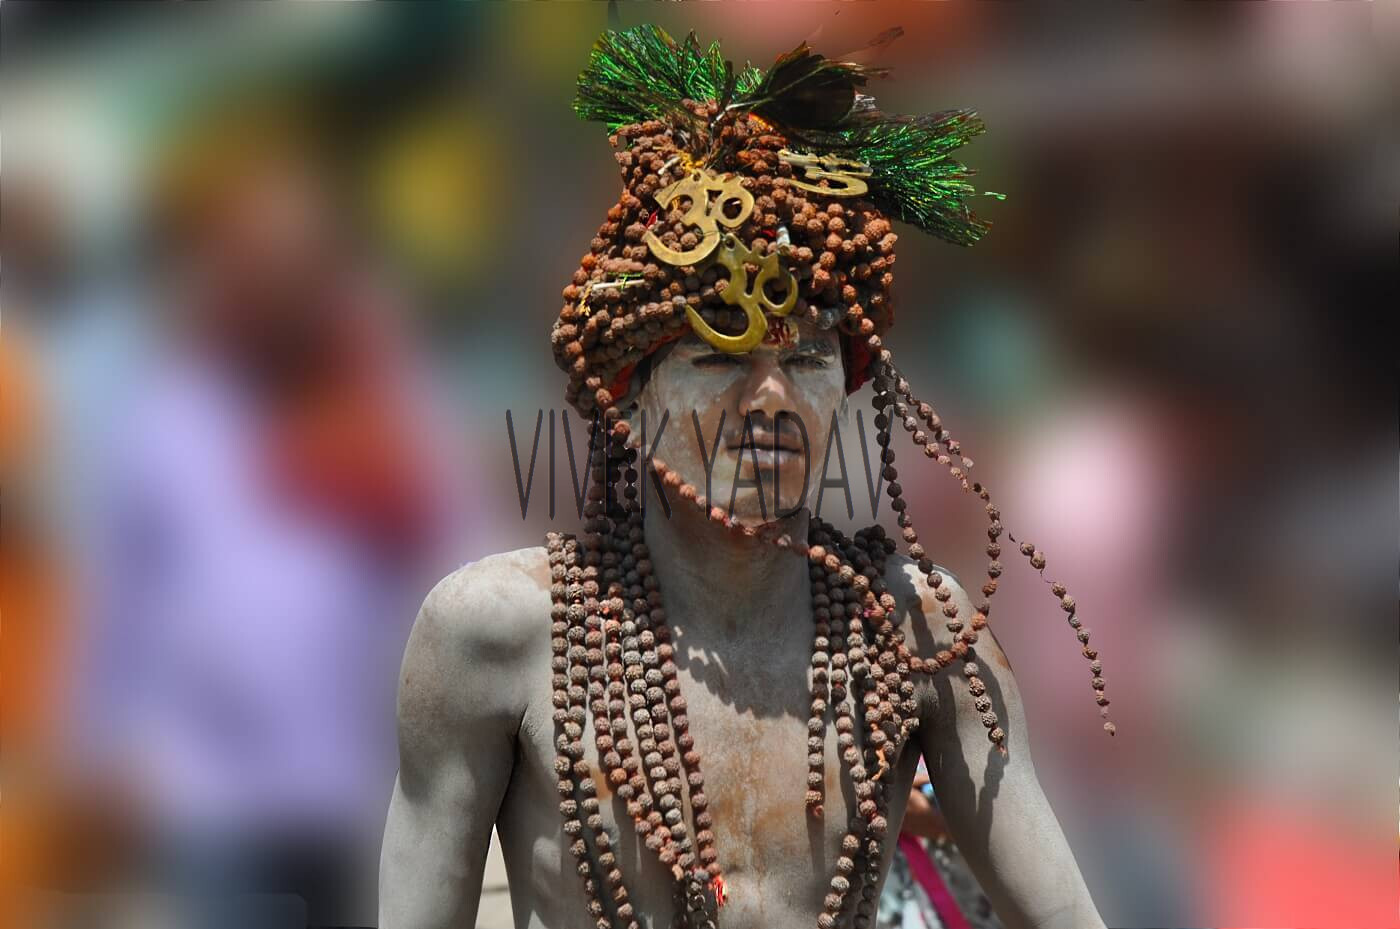 Photo Gallery Exhibitions - Expression of Kumbh